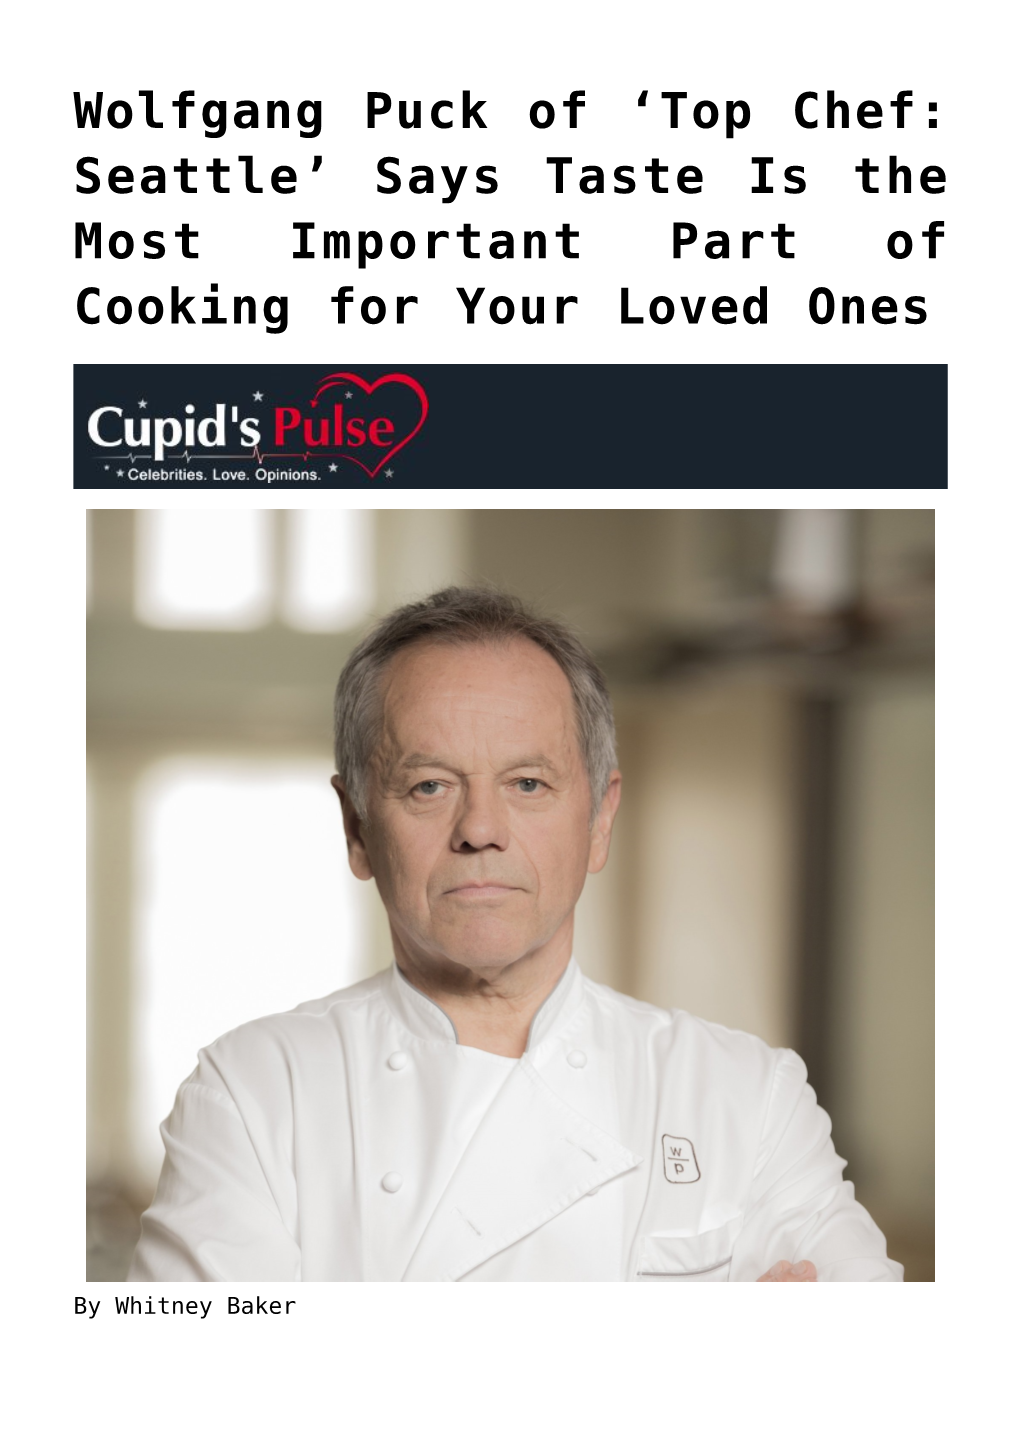 Wolfgang Puck of 'Top Chef: Seattle' Says Taste Is the Most Important